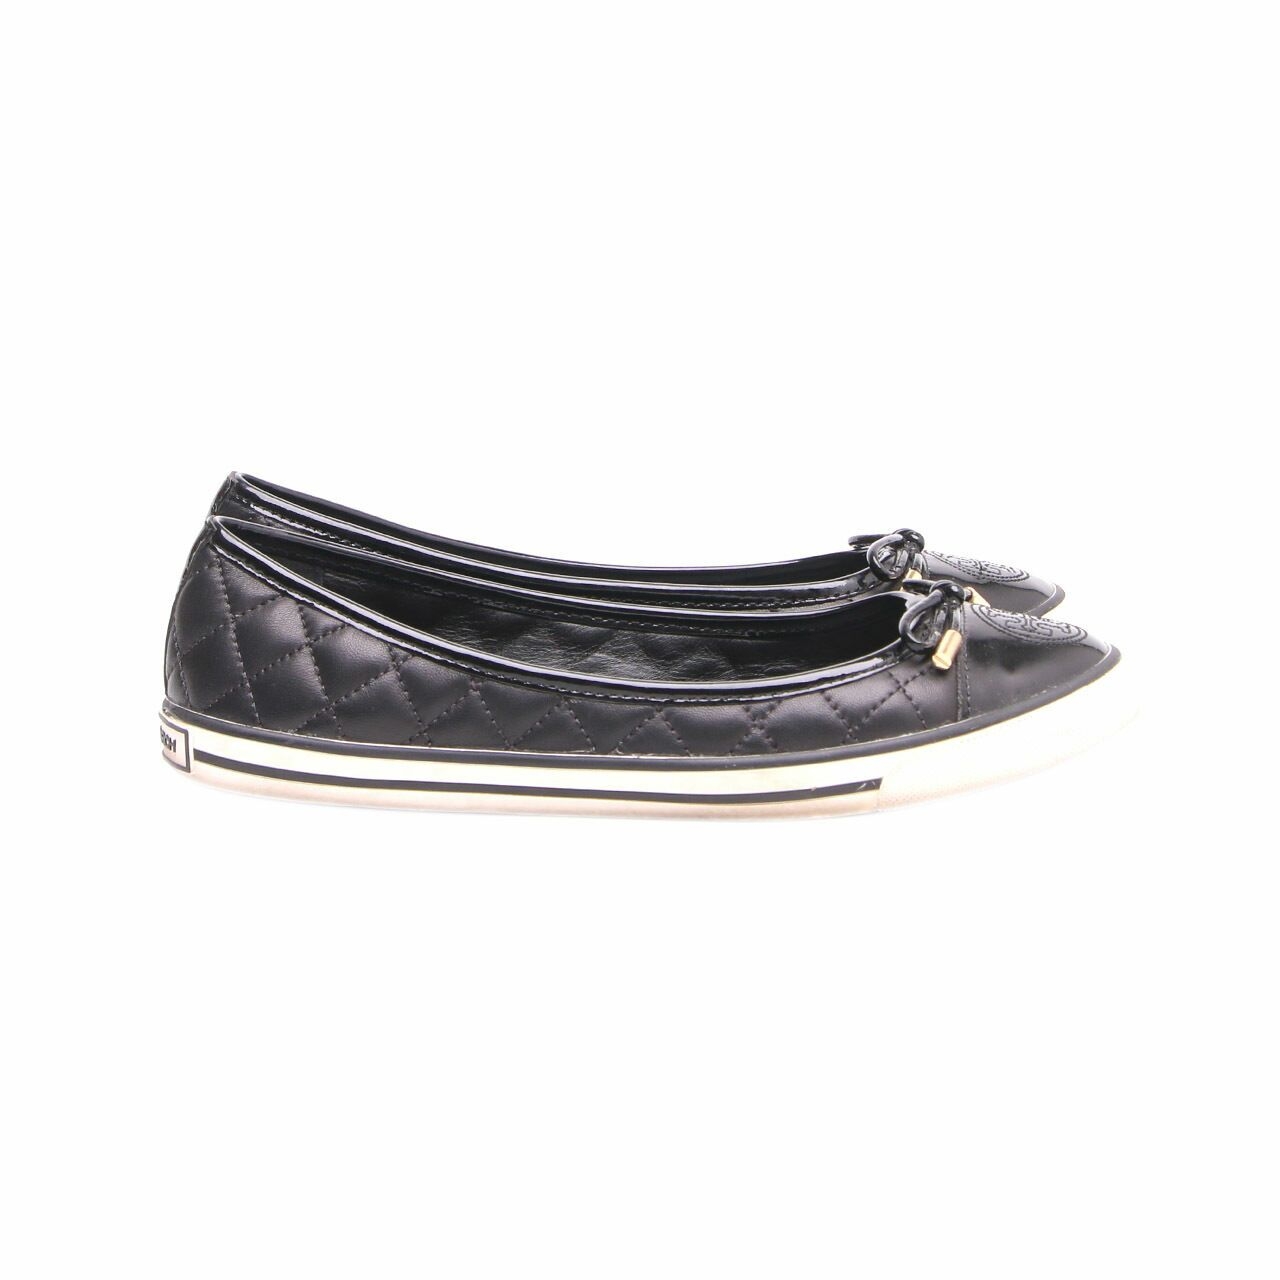 Tory Burch Skyler Quilted Black Flats Shoes